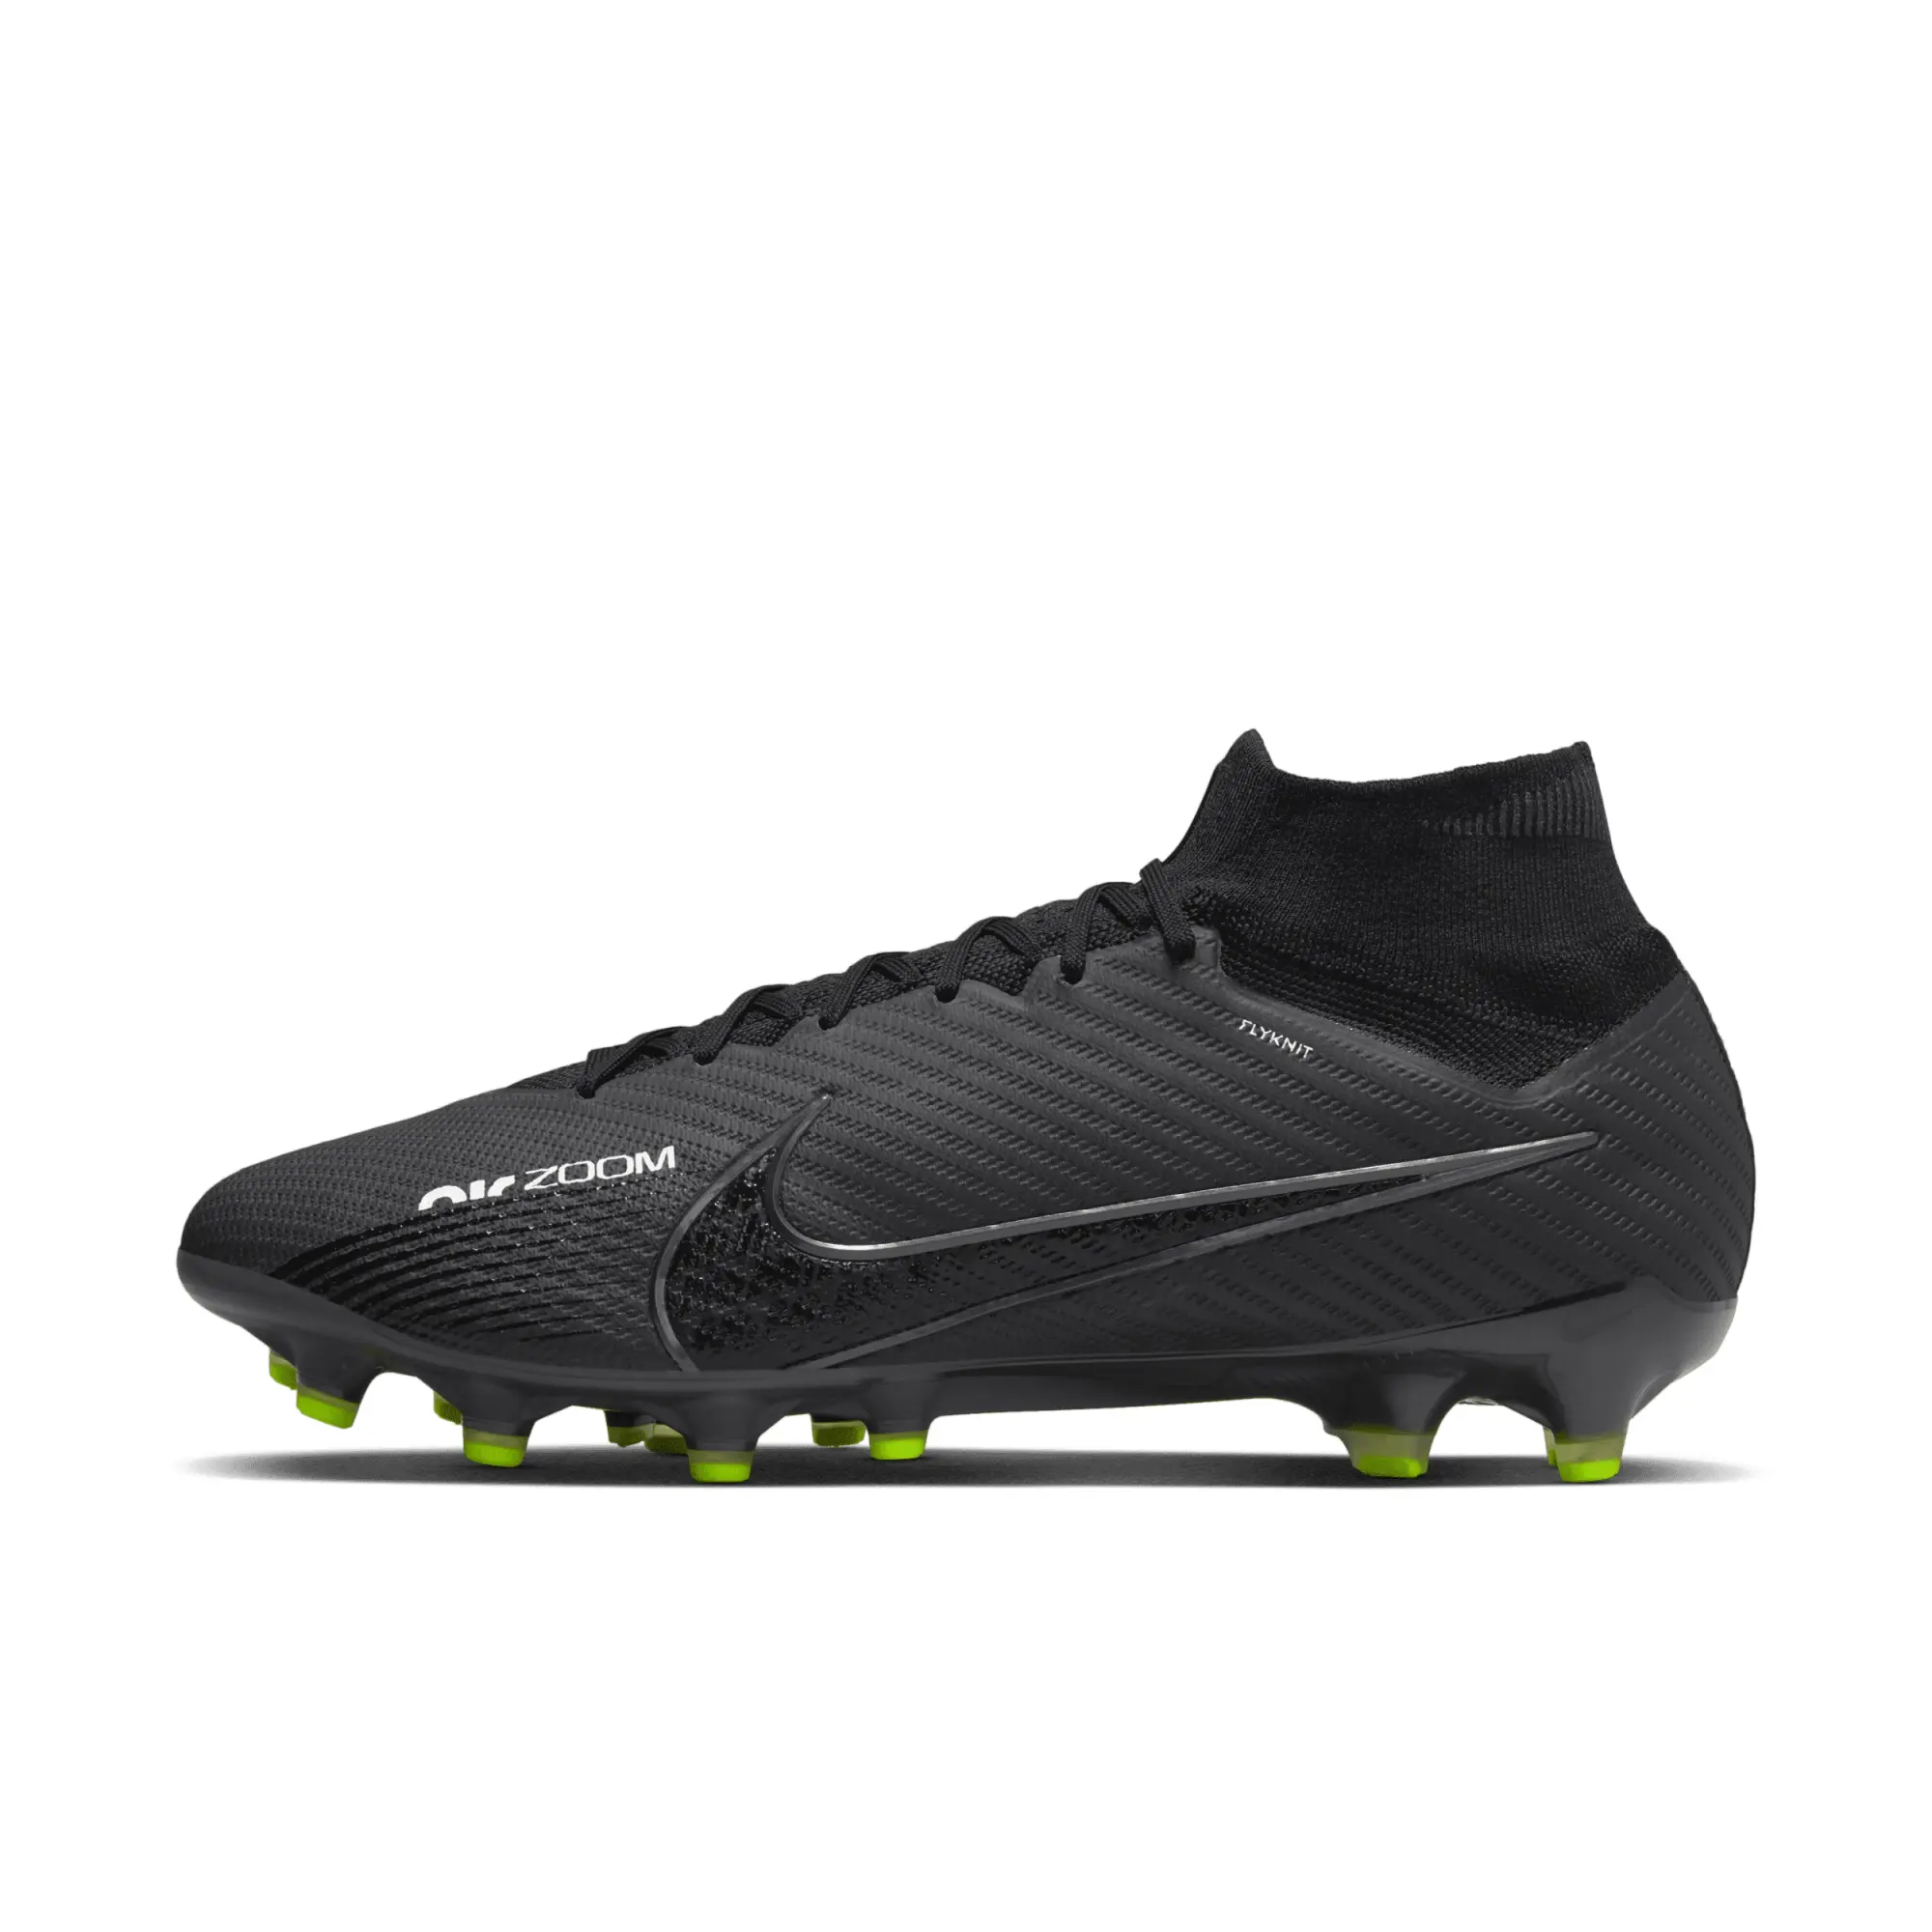 Nike Zoom Mercurial Superfly 9 Elite AG-Pro Artificial-Grass Football Boot - Black